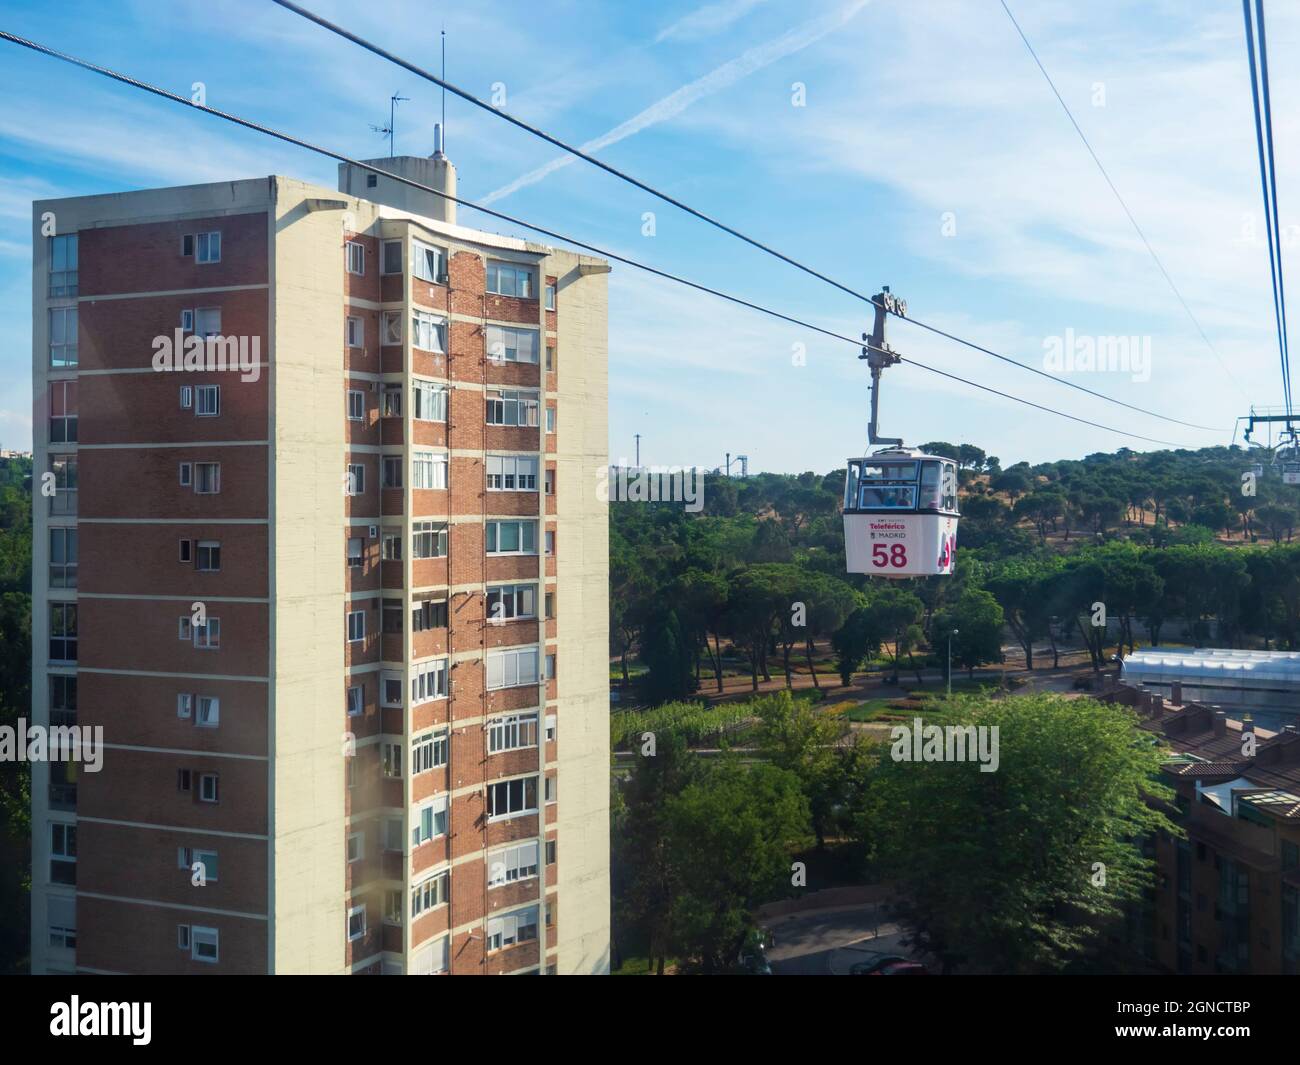 Cable car cabins circling above Madrid's Casa de Campo between trees and buildings. Stock Photo